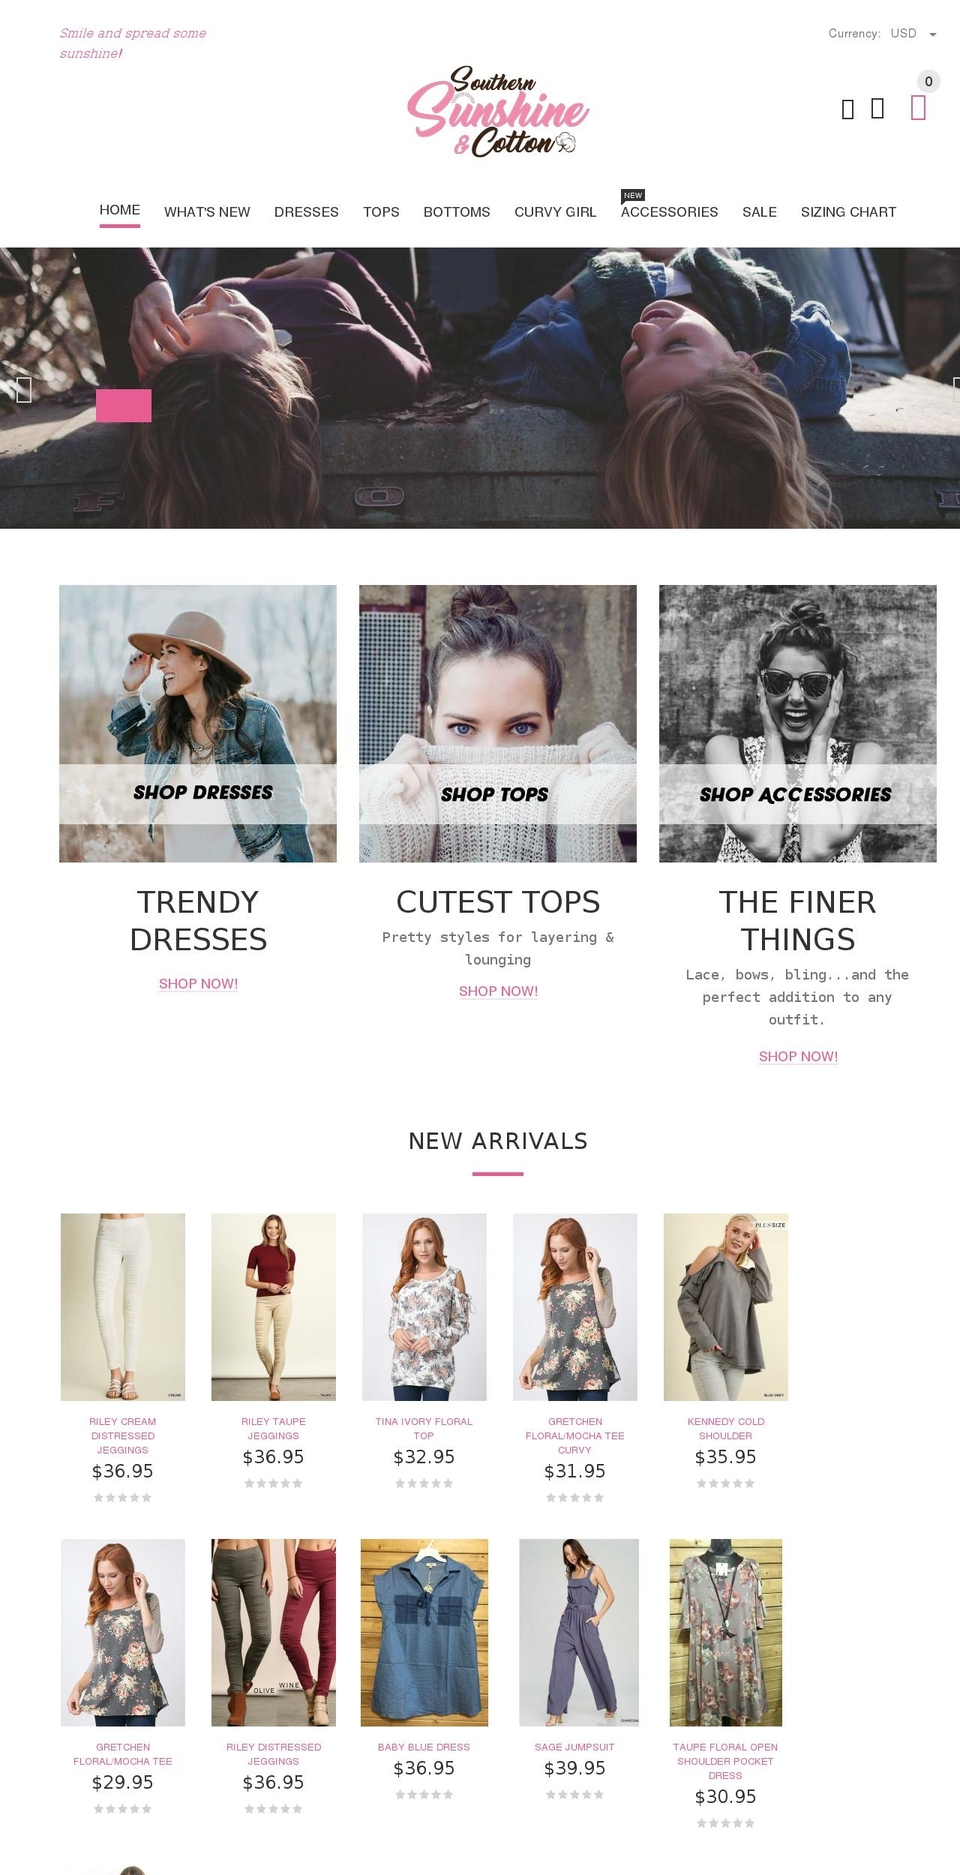 yourstore-v2-1-3 Shopify theme site example southern-sunshine-and-cotton-boutique.com